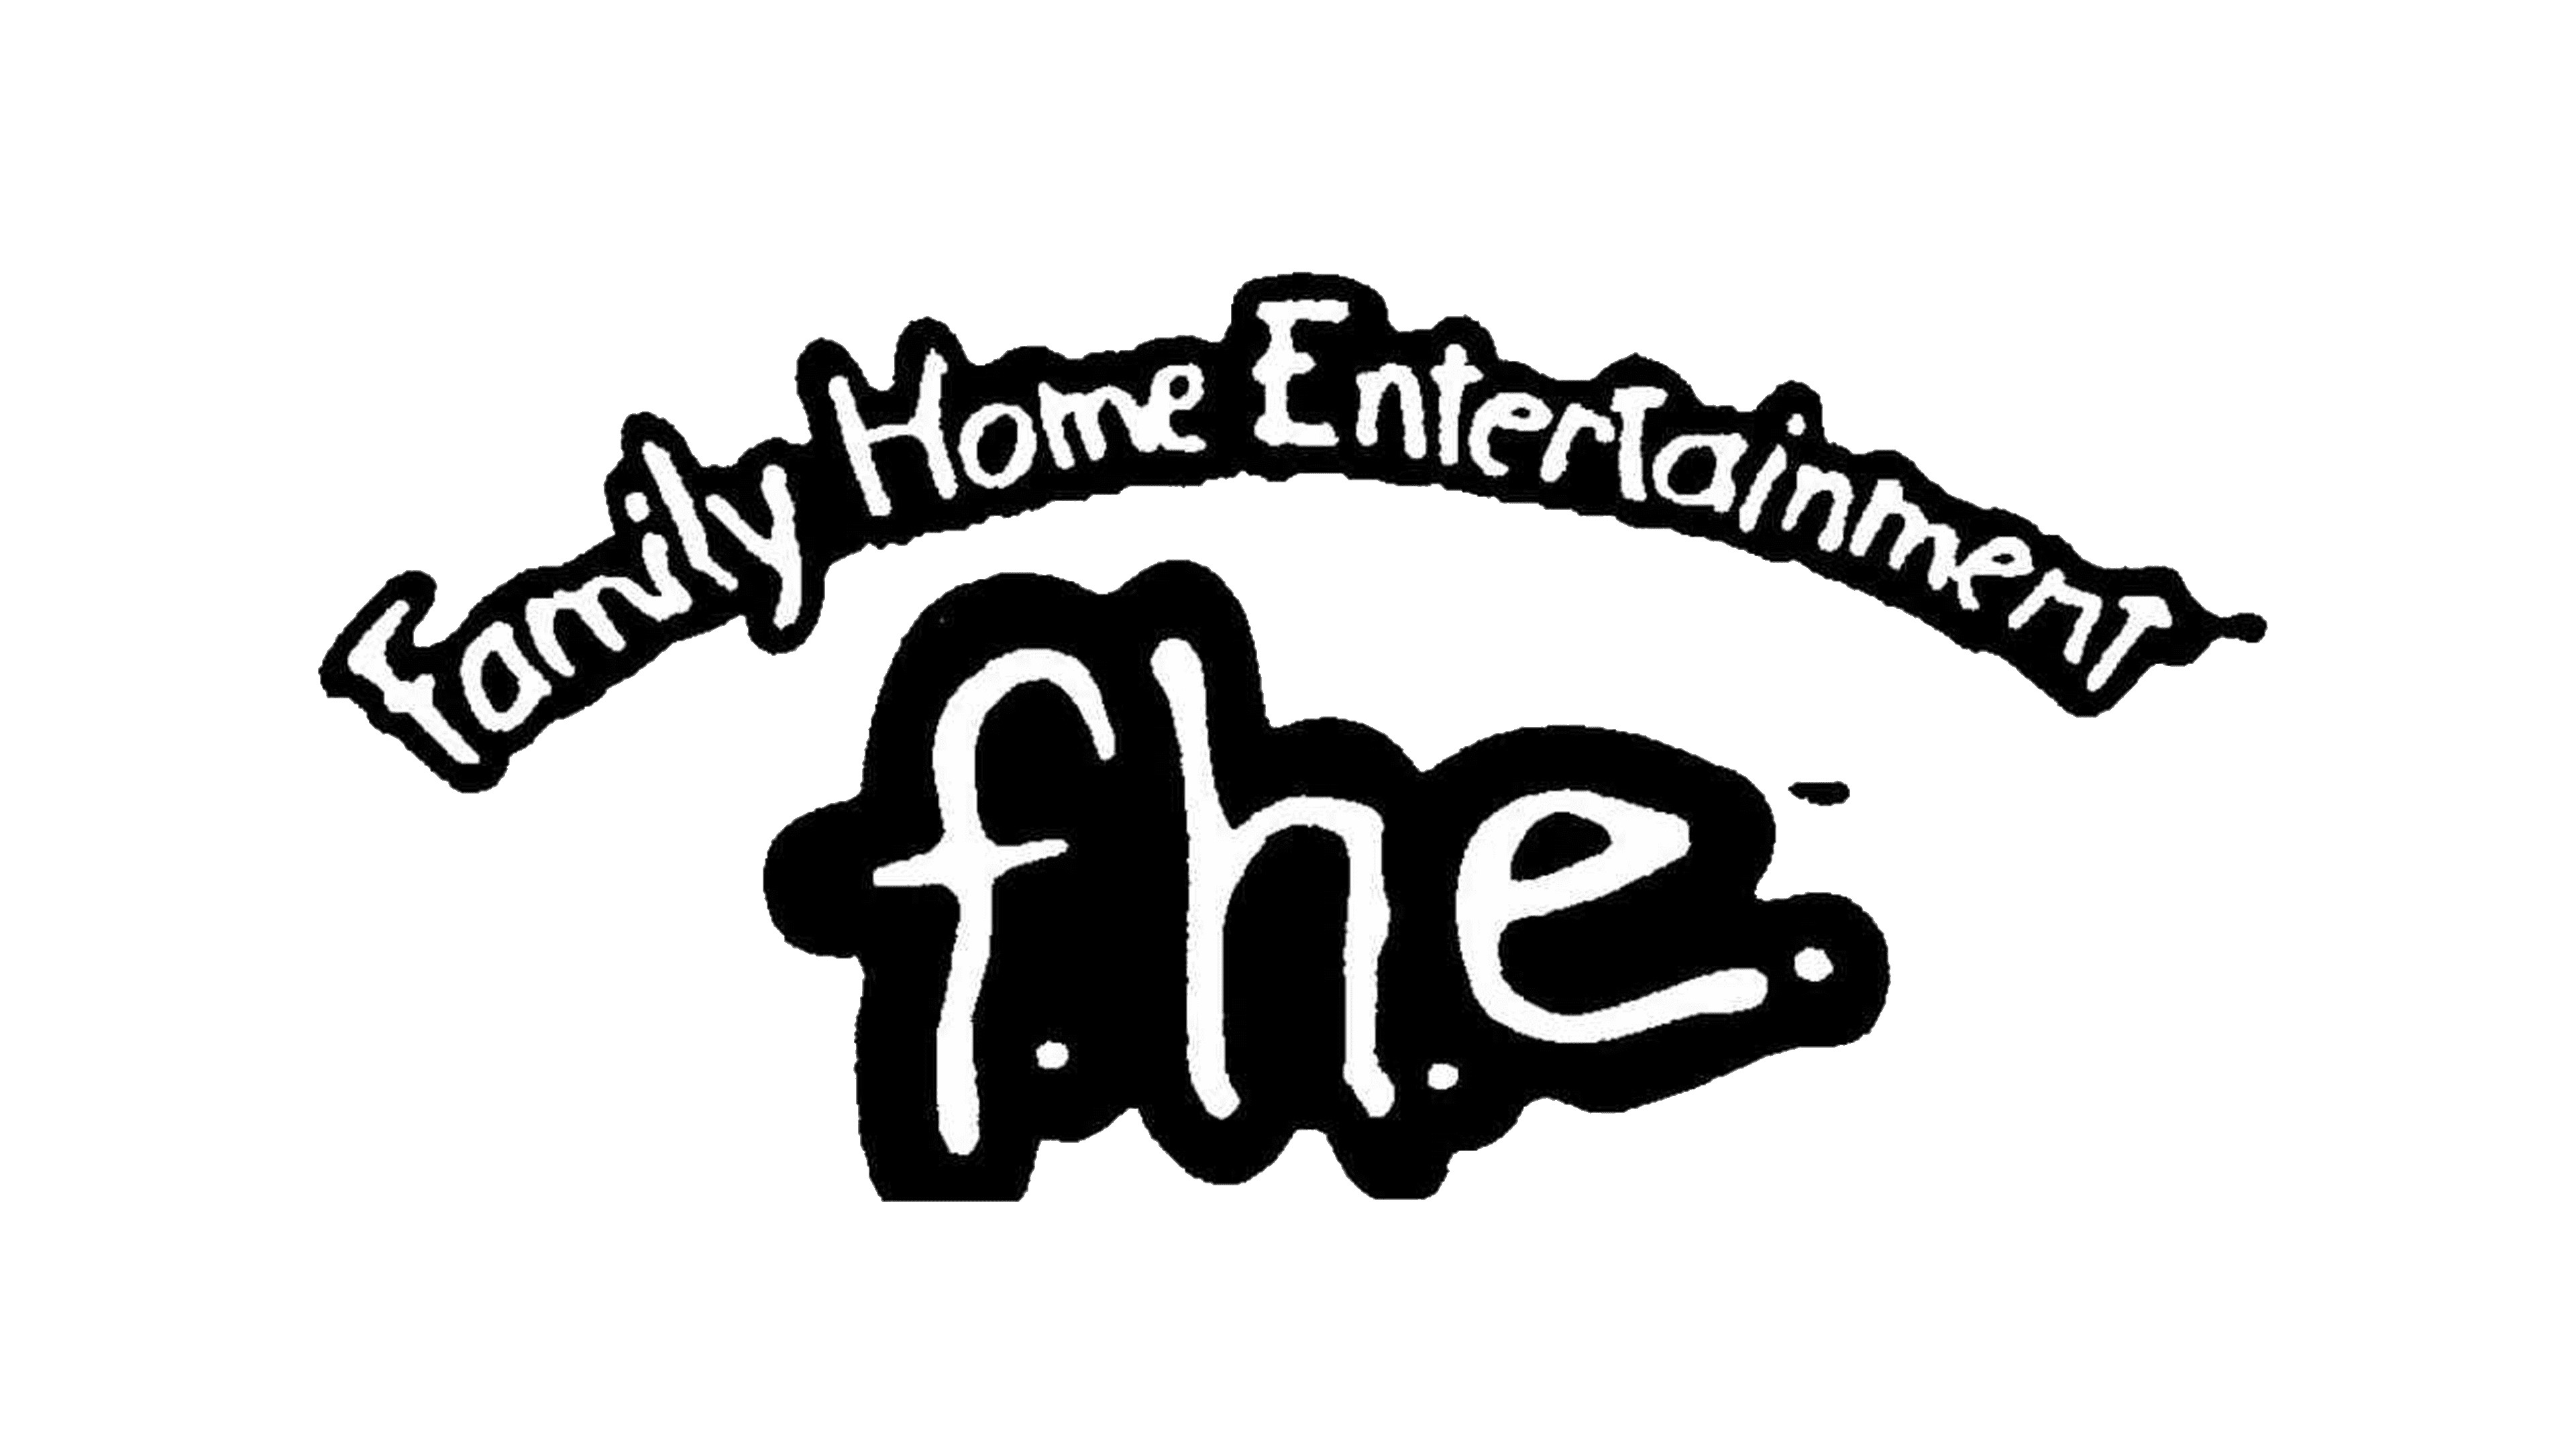 entertainment png images